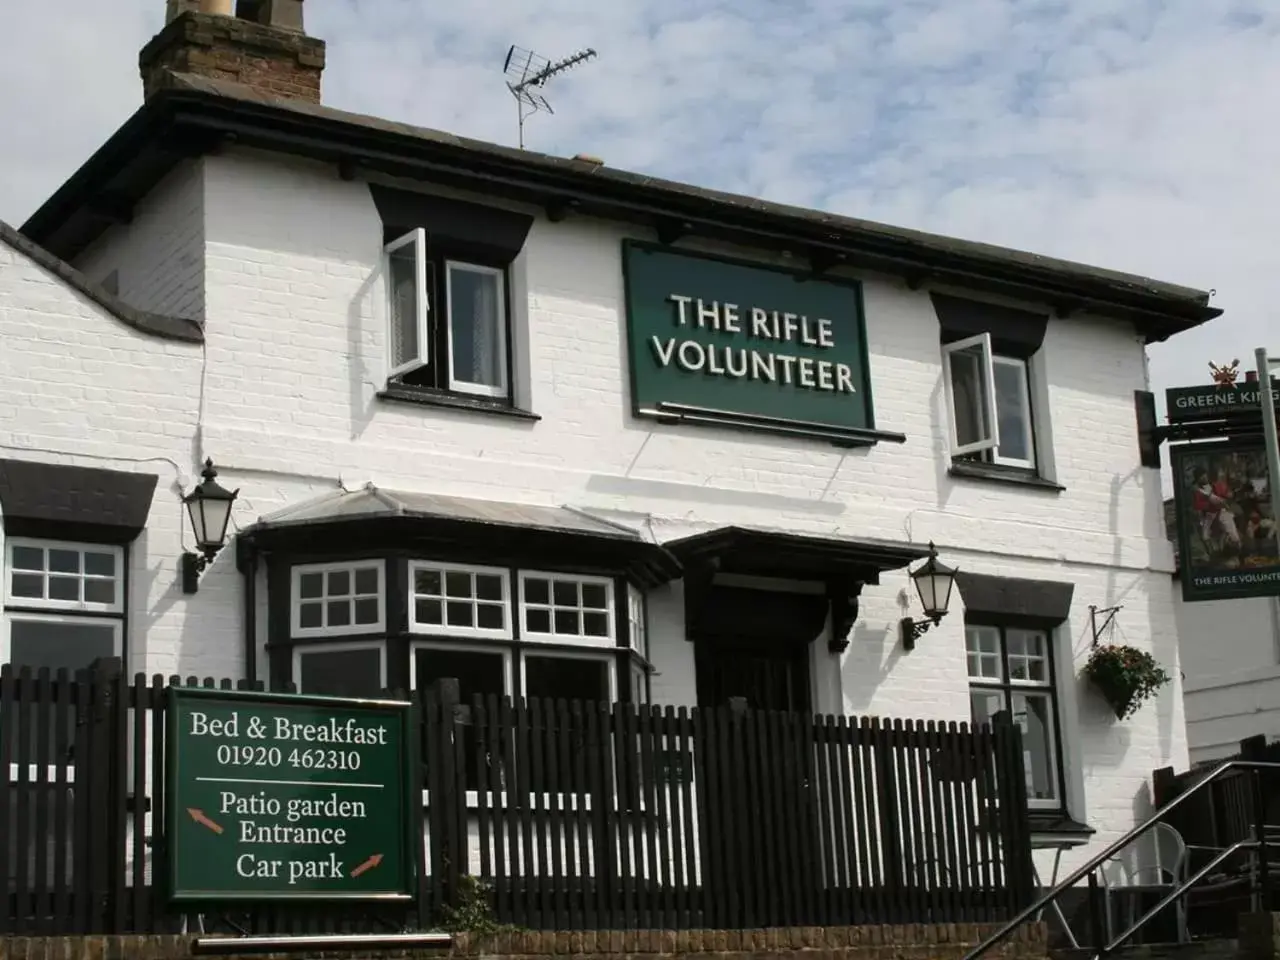 Property building in The Rifle Volunteer